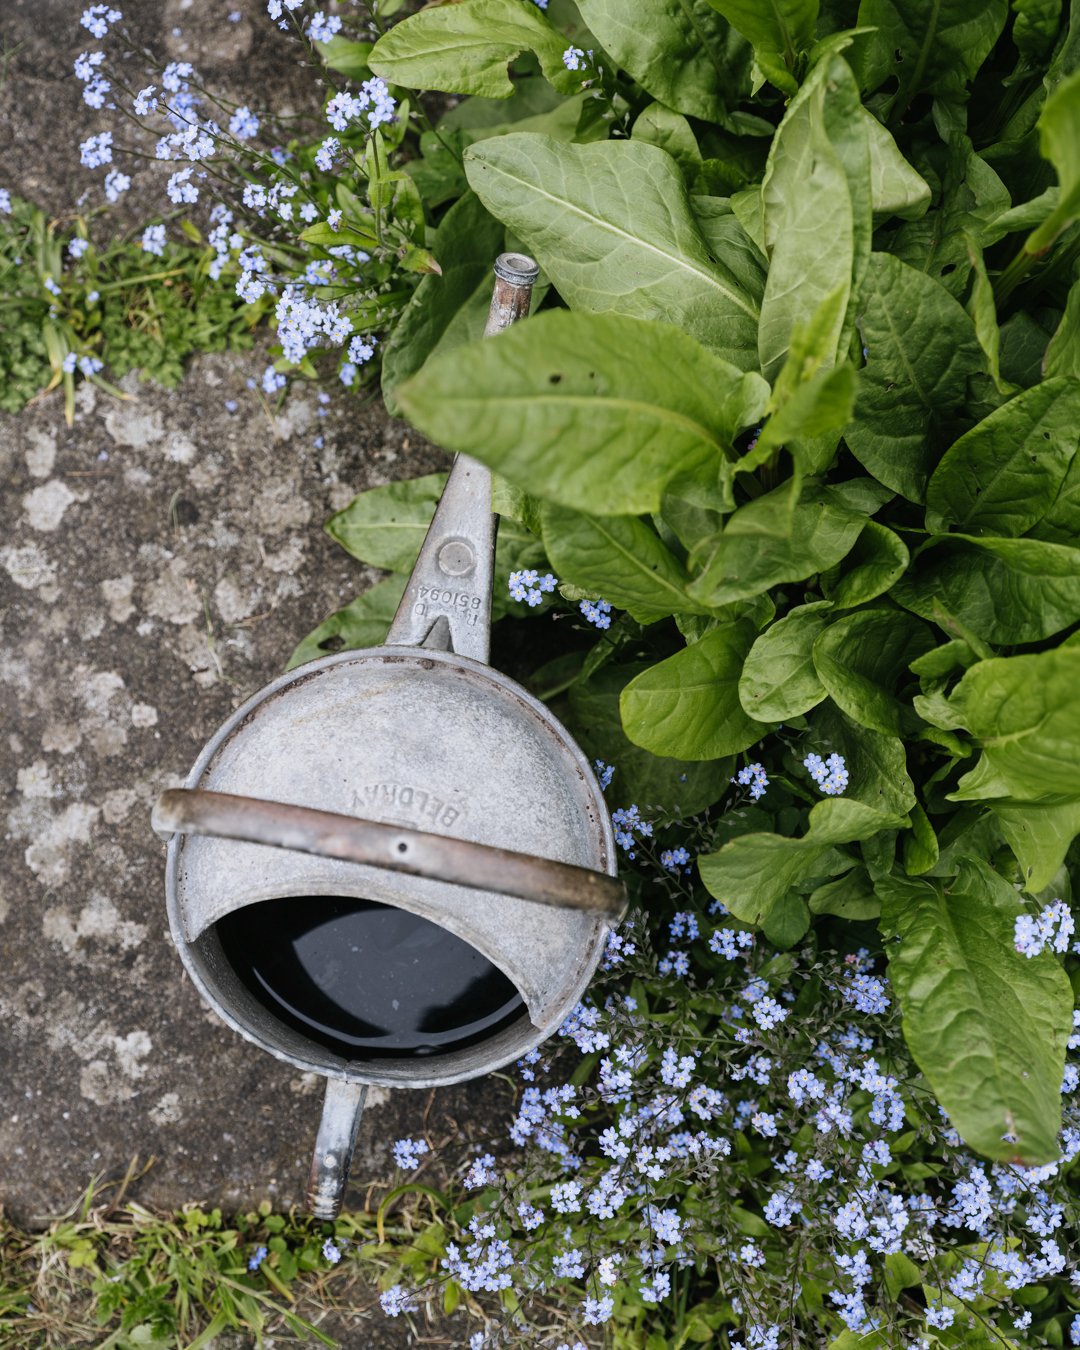 Watering can, sorrel and forget-me-nots. The last two grow in abundance here.